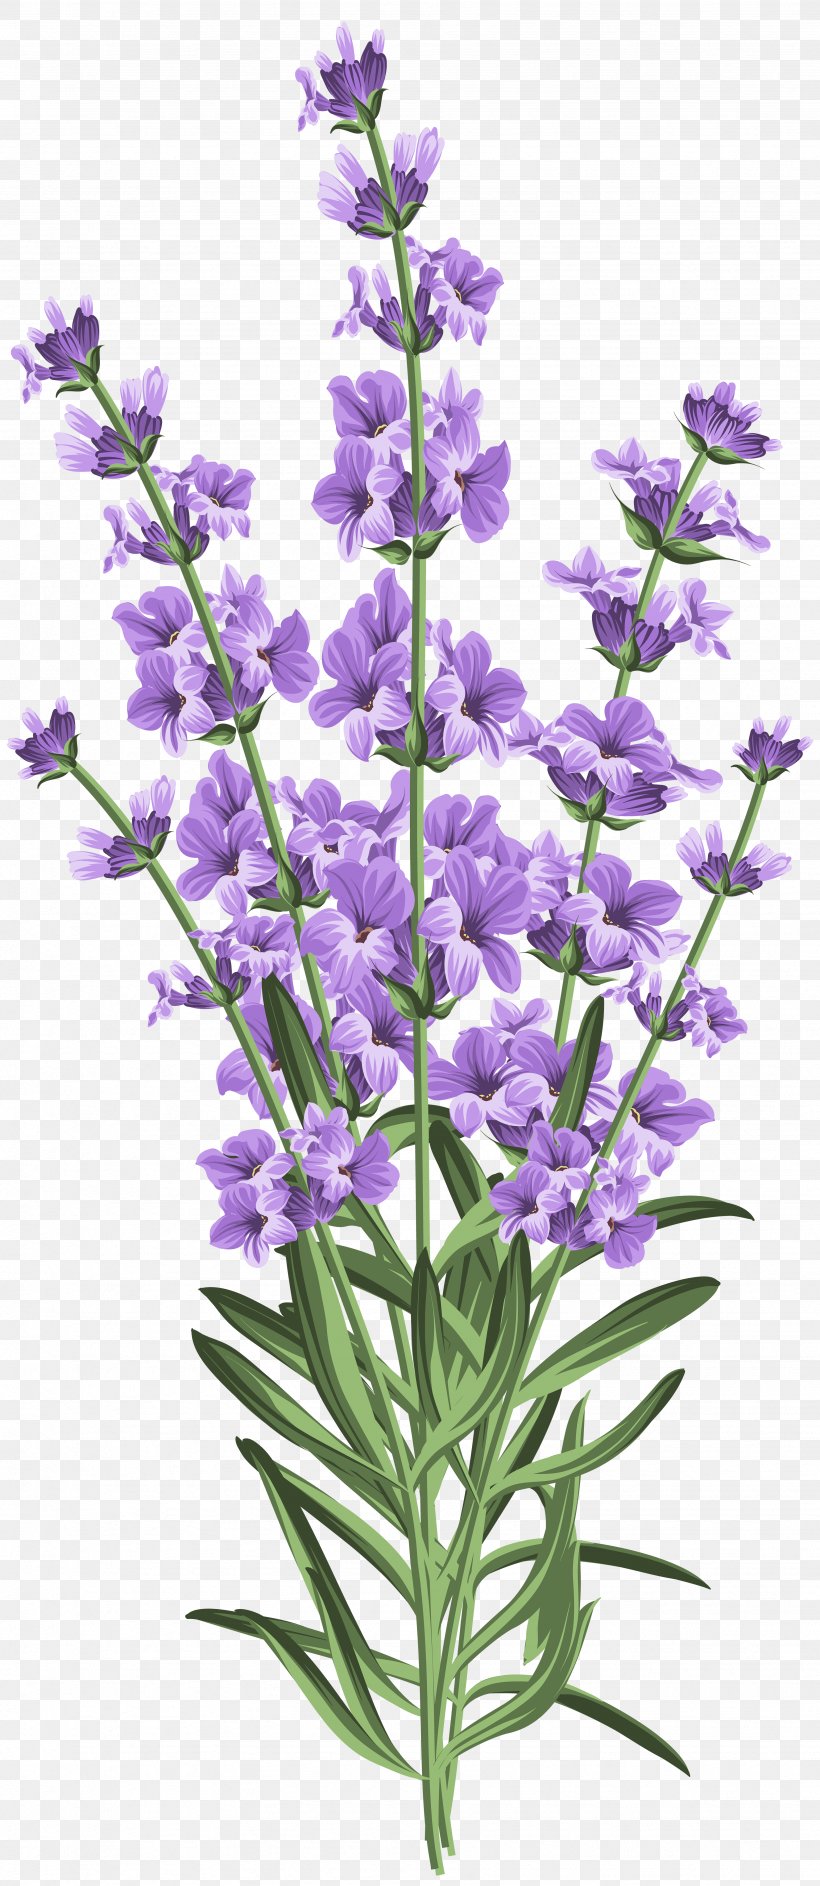 Lavender Flowers Top View Png - Get Images One